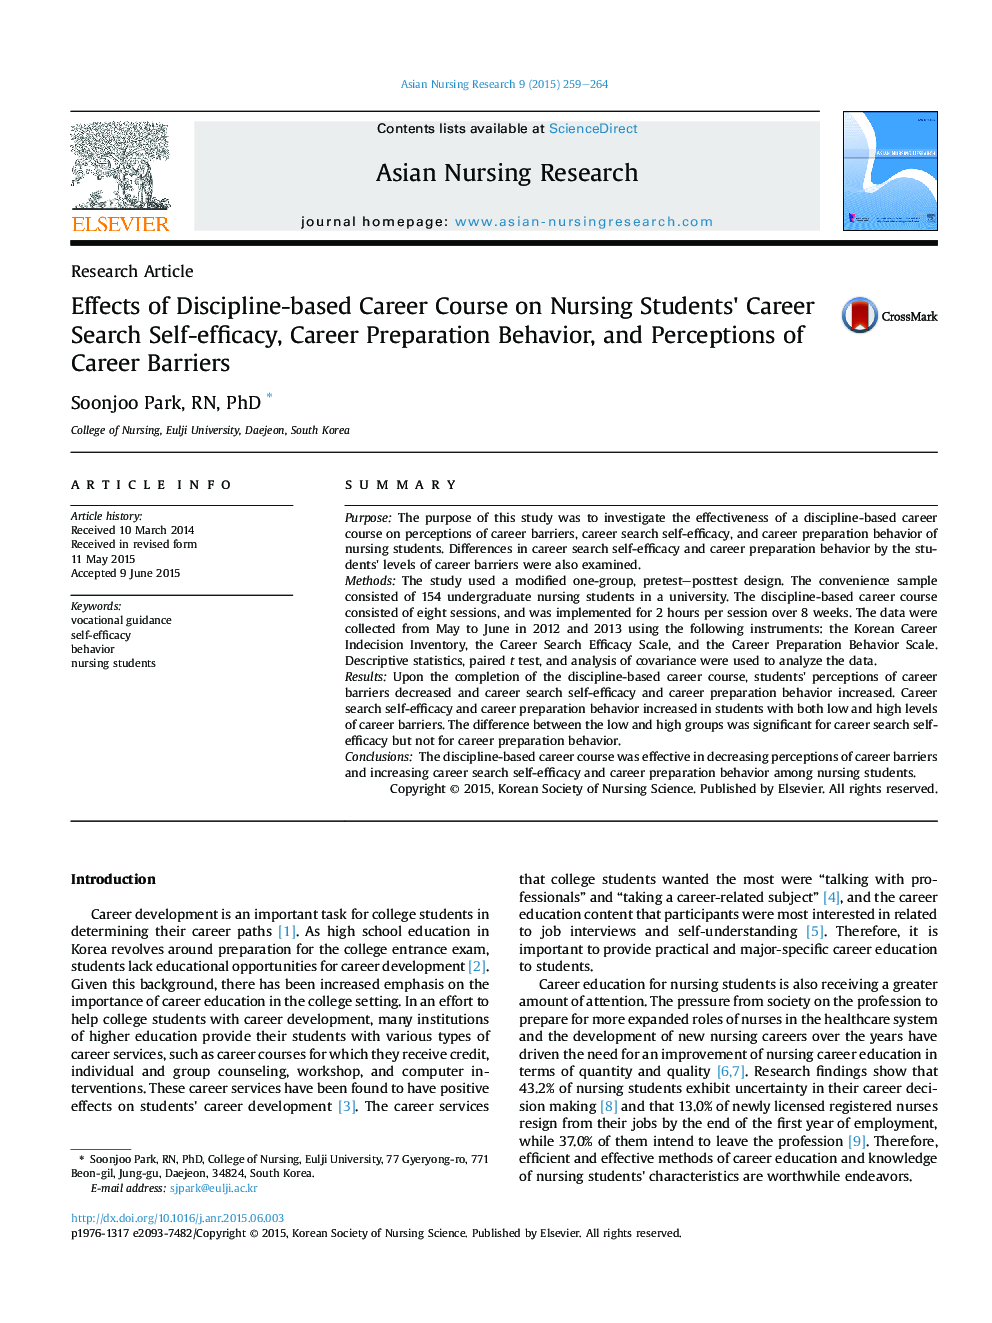 Effects of Discipline-based Career Course on Nursing Students' Career Search Self-efficacy, Career Preparation Behavior, and Perceptions of Career Barriers